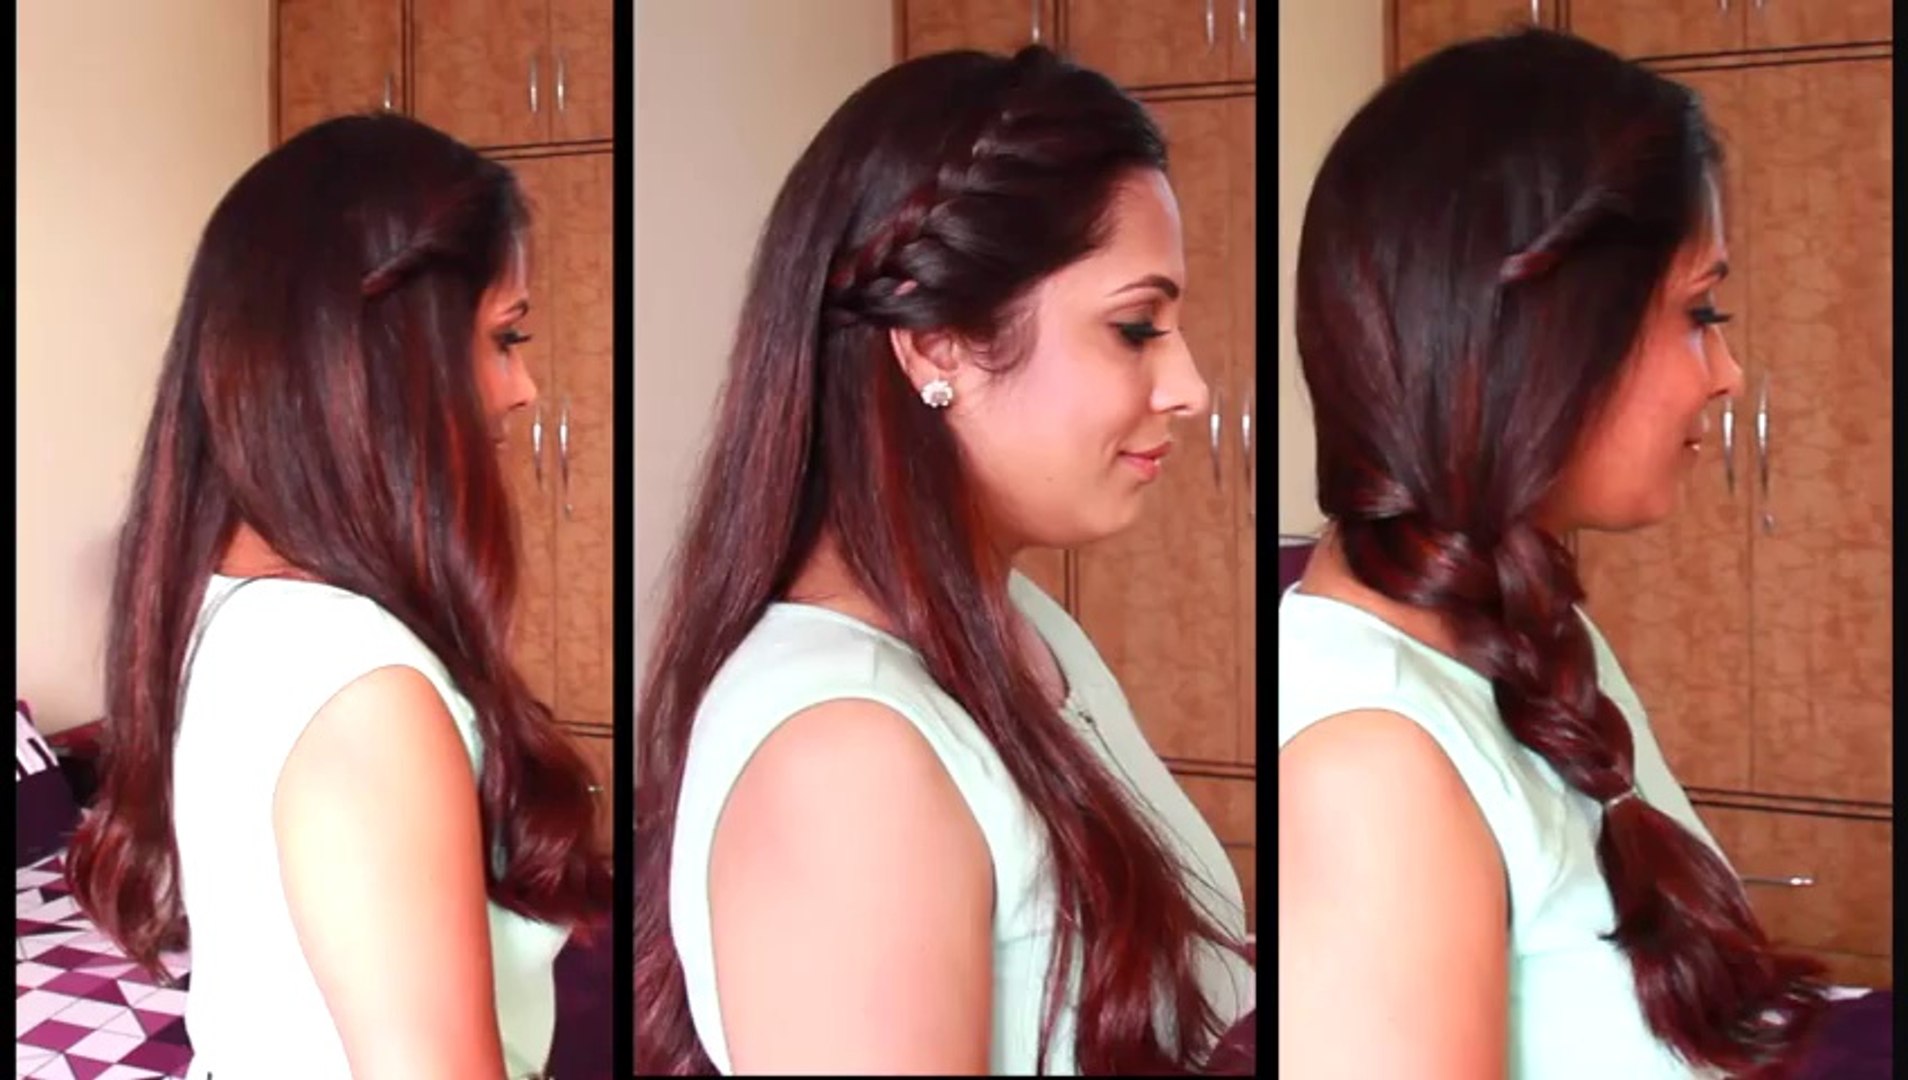 5 Easy Hair Styles For Girls in 5 Minutes Full HD Video - video Dailymotion